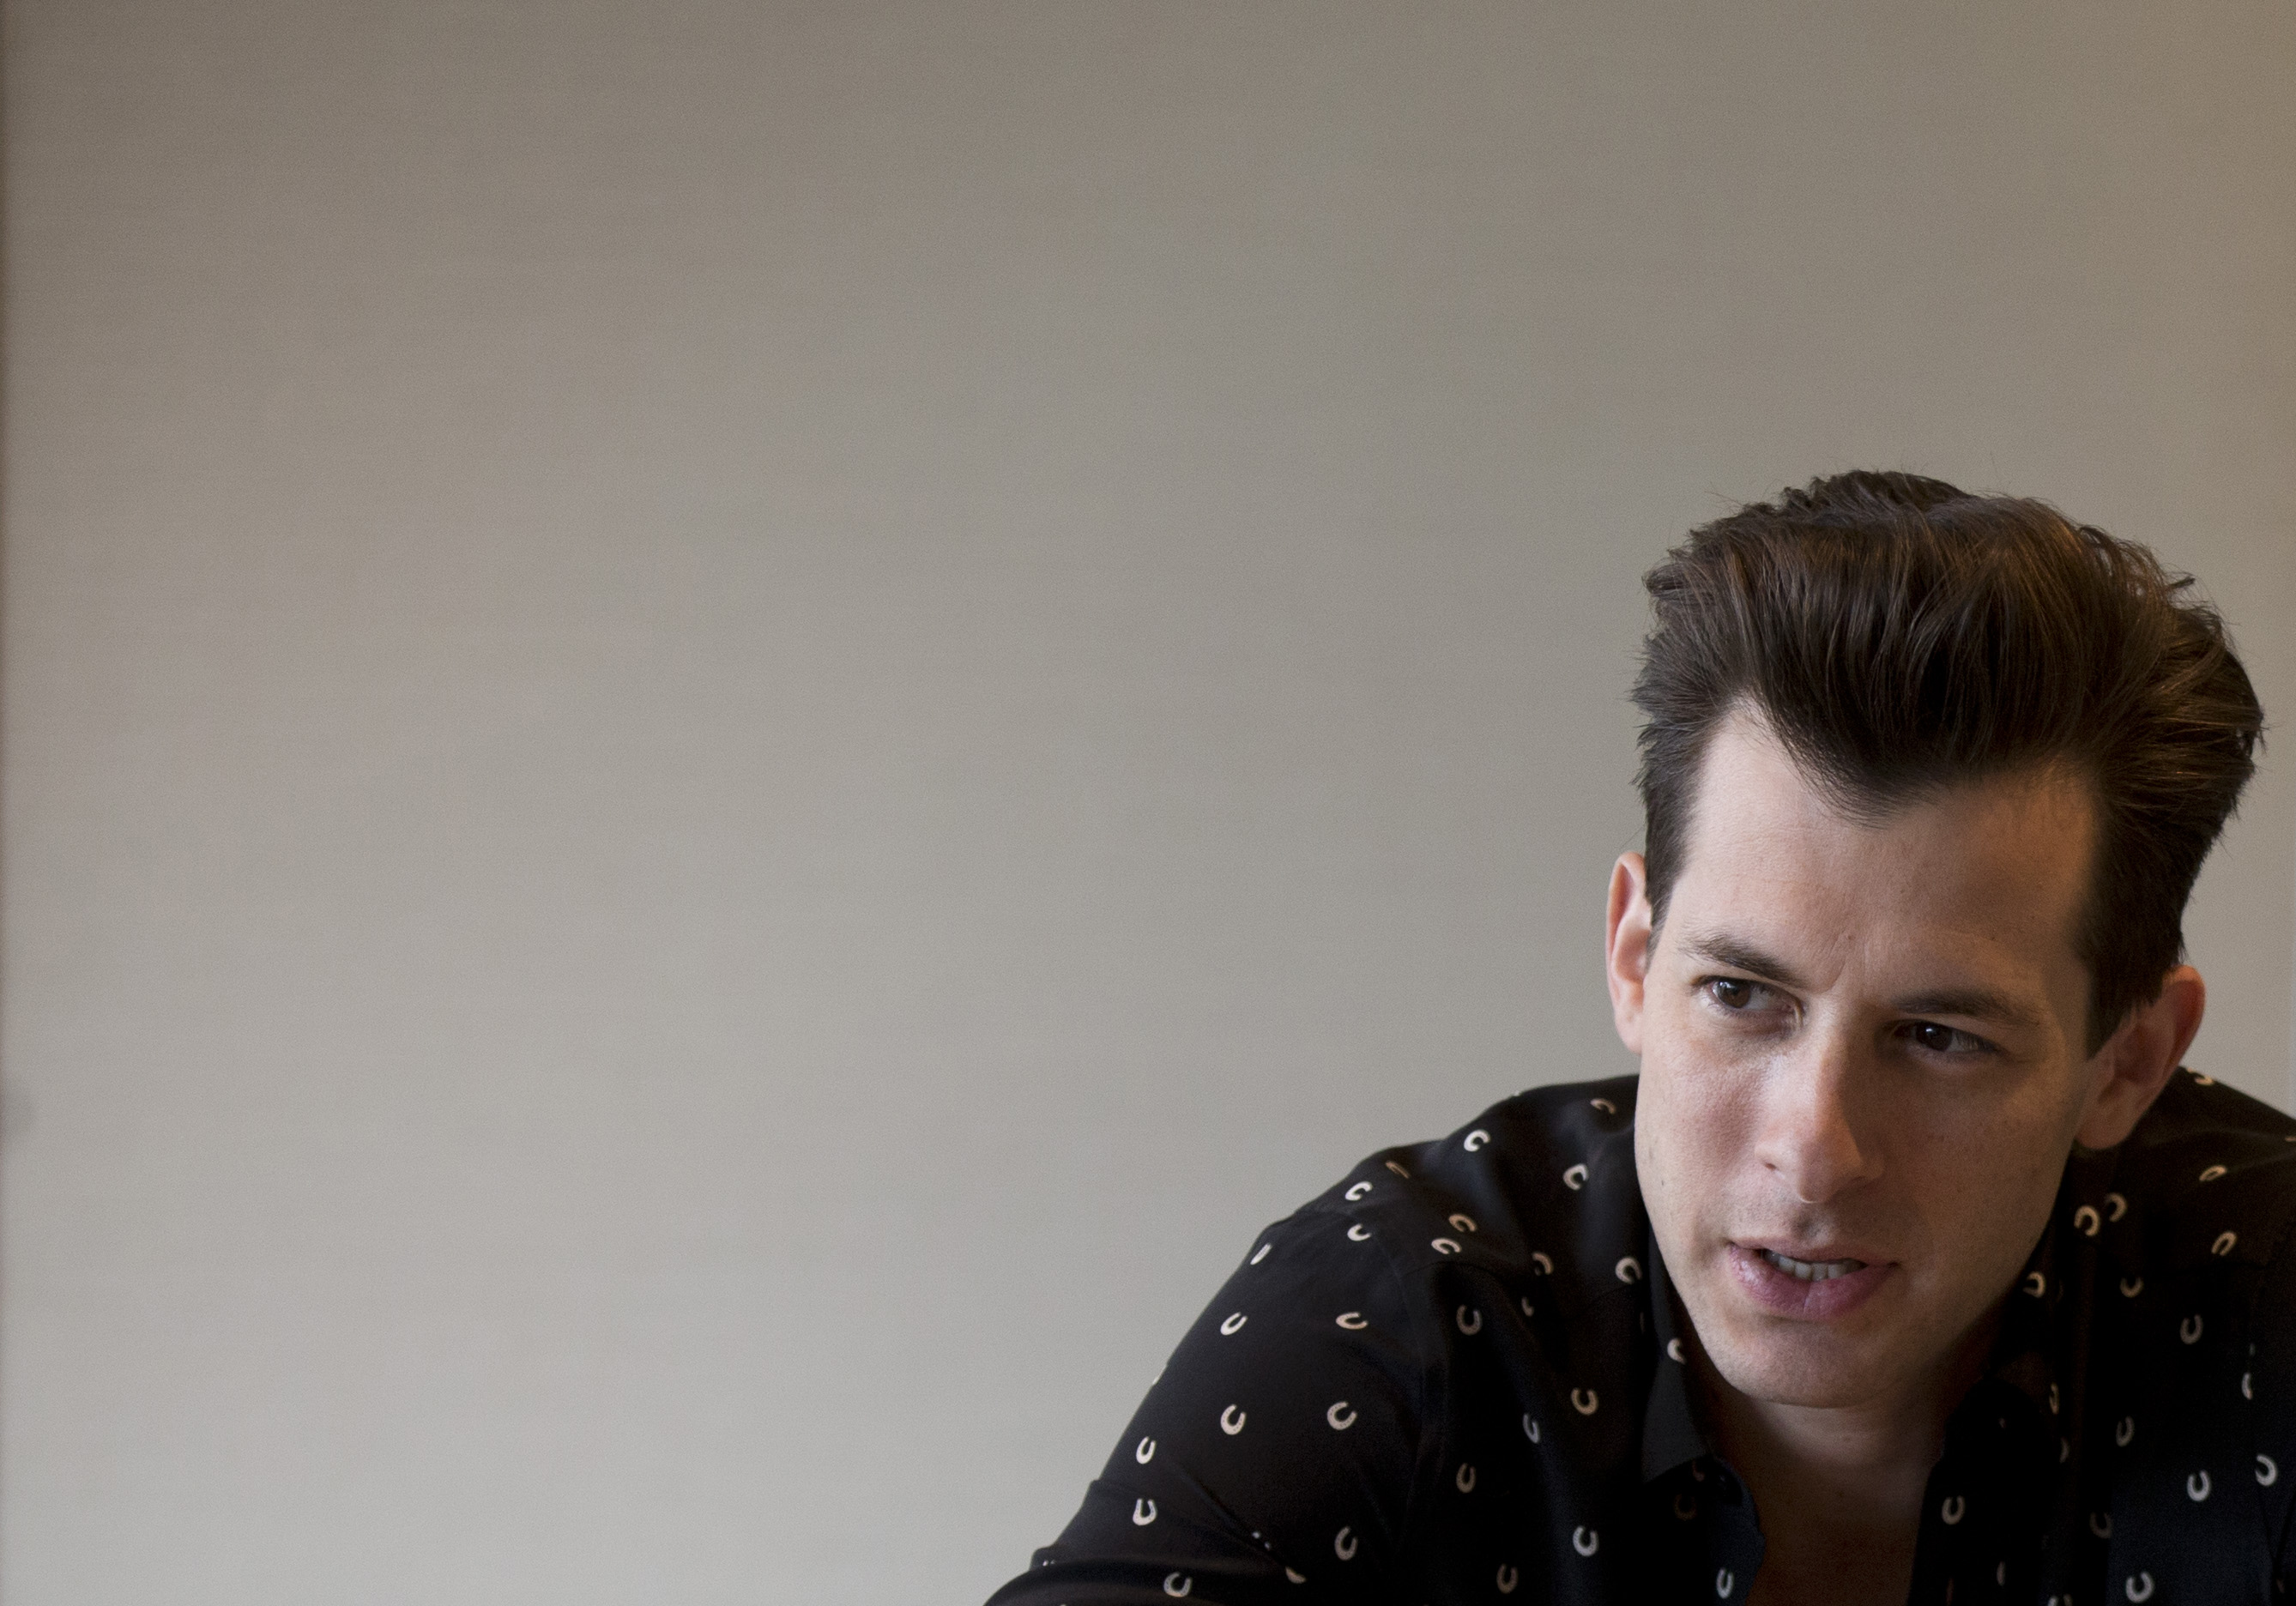 British music producer and DJ Mark Ronson speaks to journalists at a media event in Mexico City